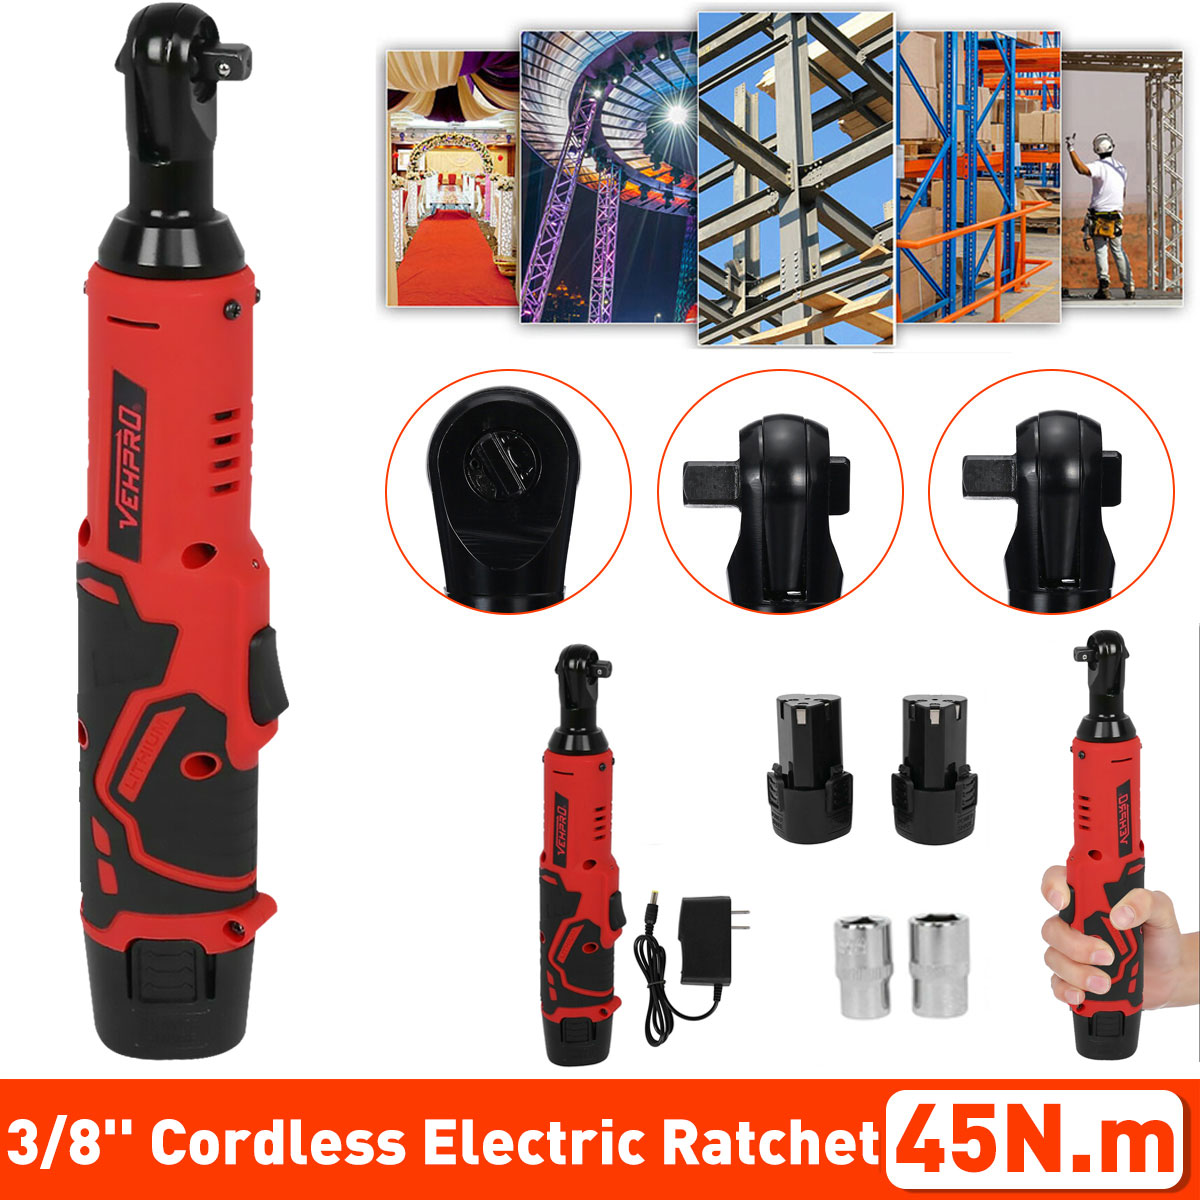 18V-45NM-Cordless-Eletctric-Ratchet-Wrench-38-Inch-Li-ion-Battery-Powered-Right-Angle-Wrench-With-2P-1843576-1